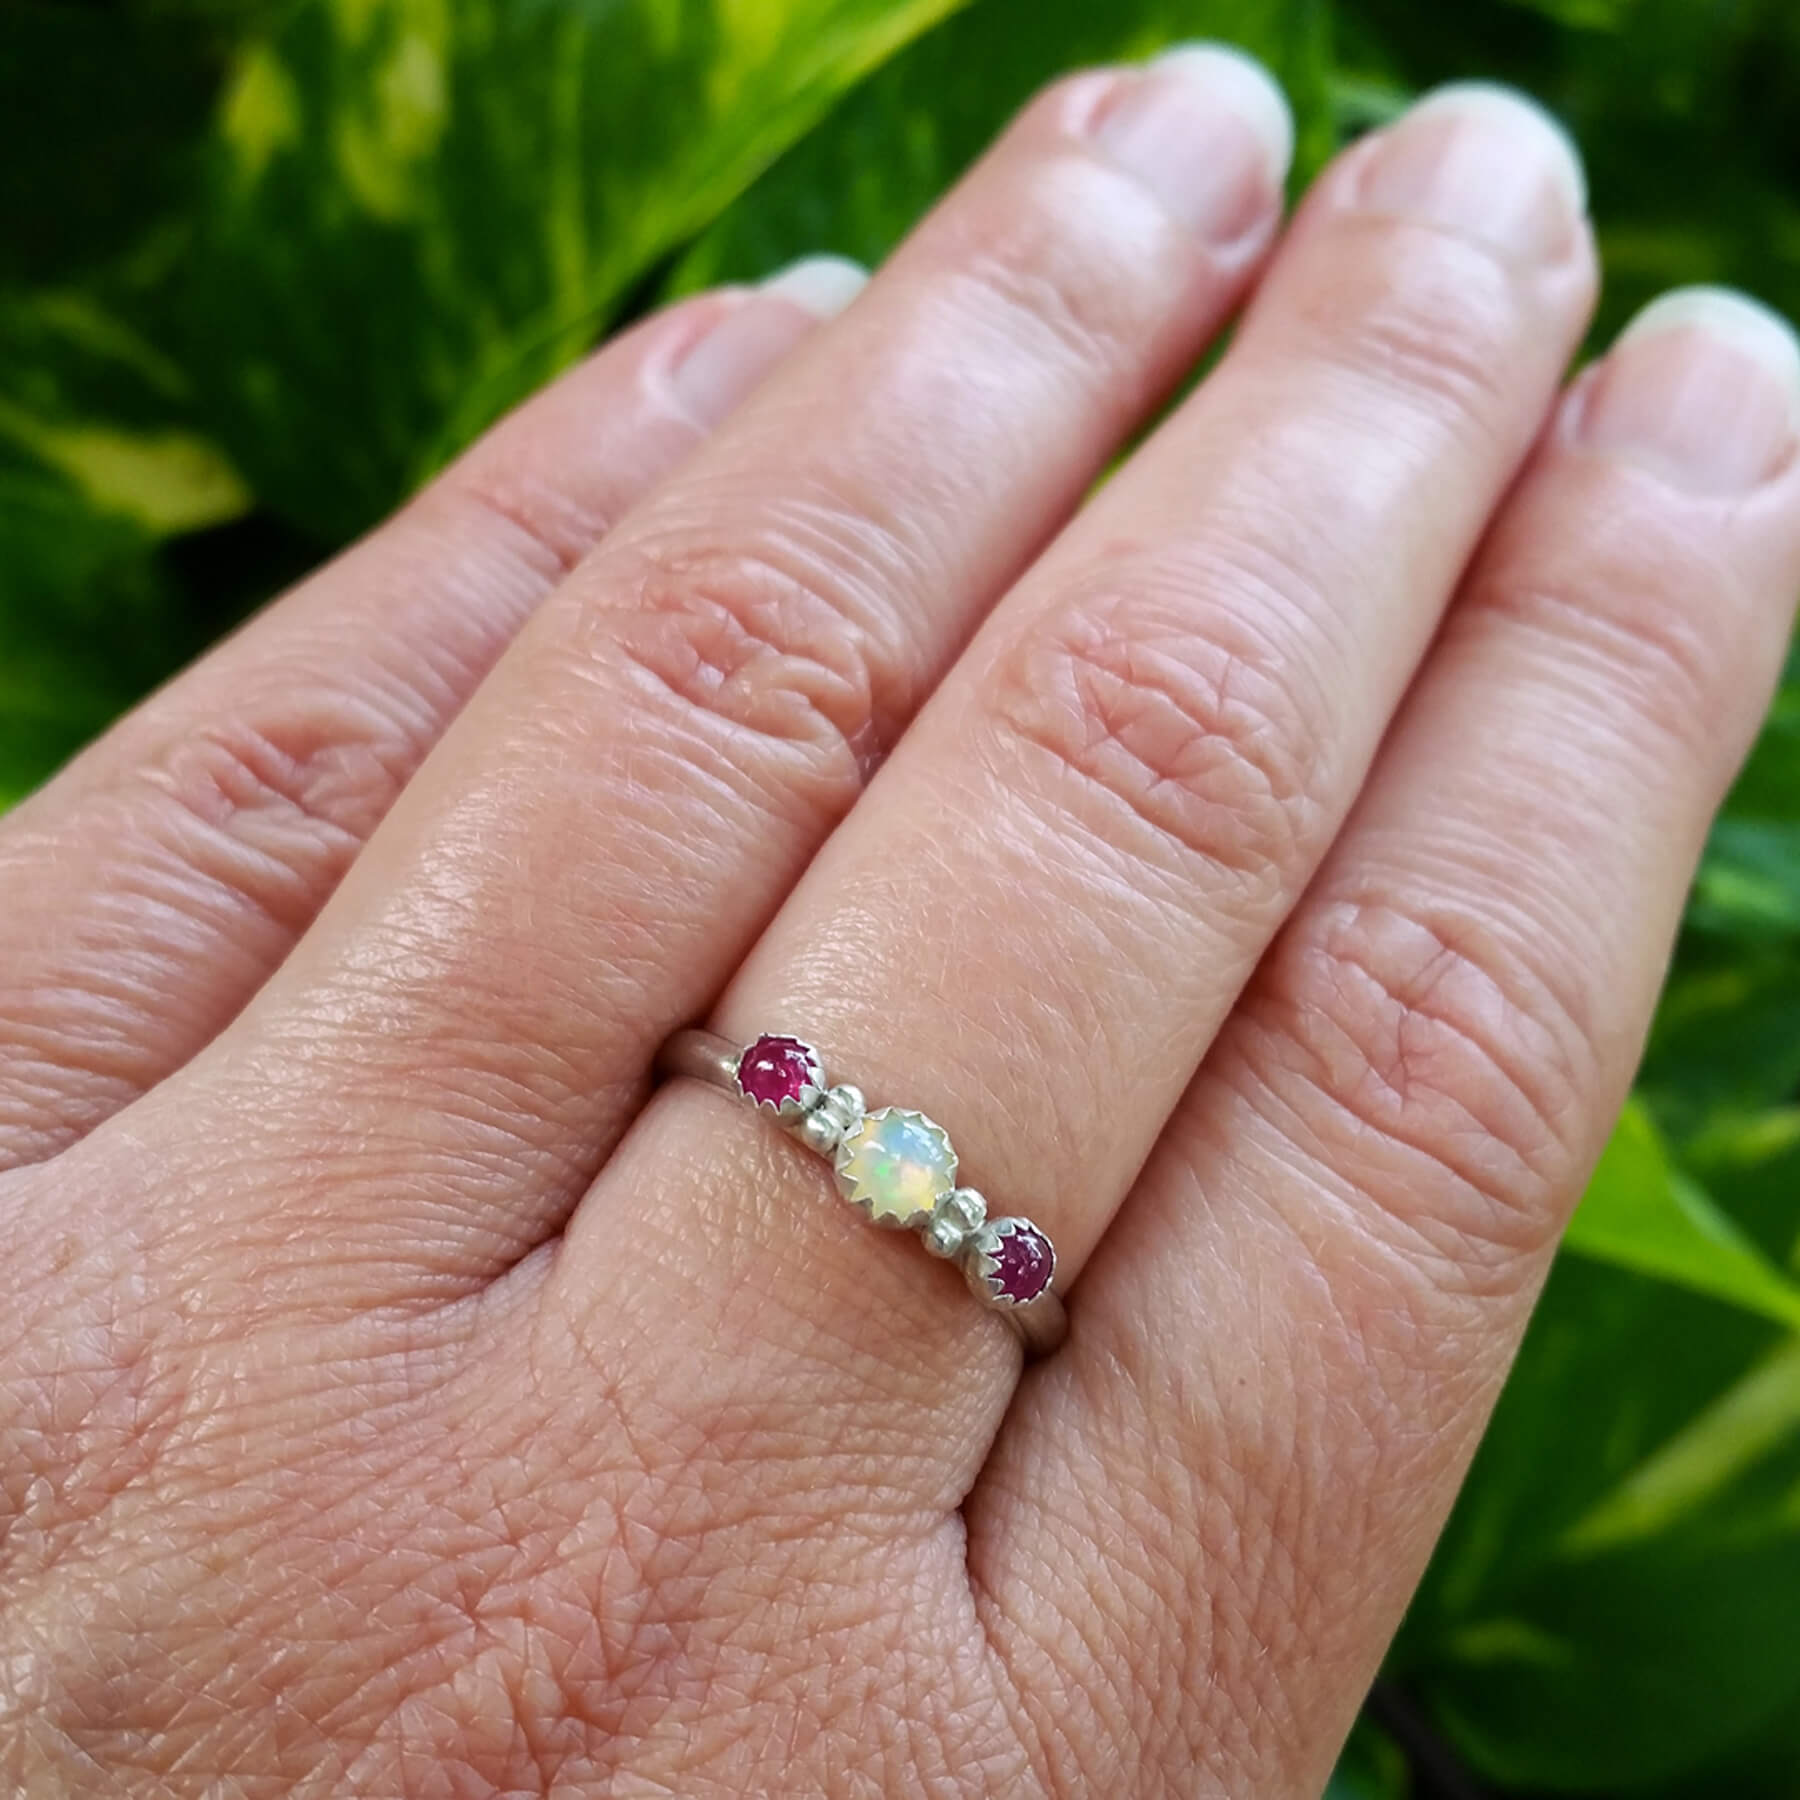 Sunlight and Mist Opal and Ruby Ring - Size 7.5